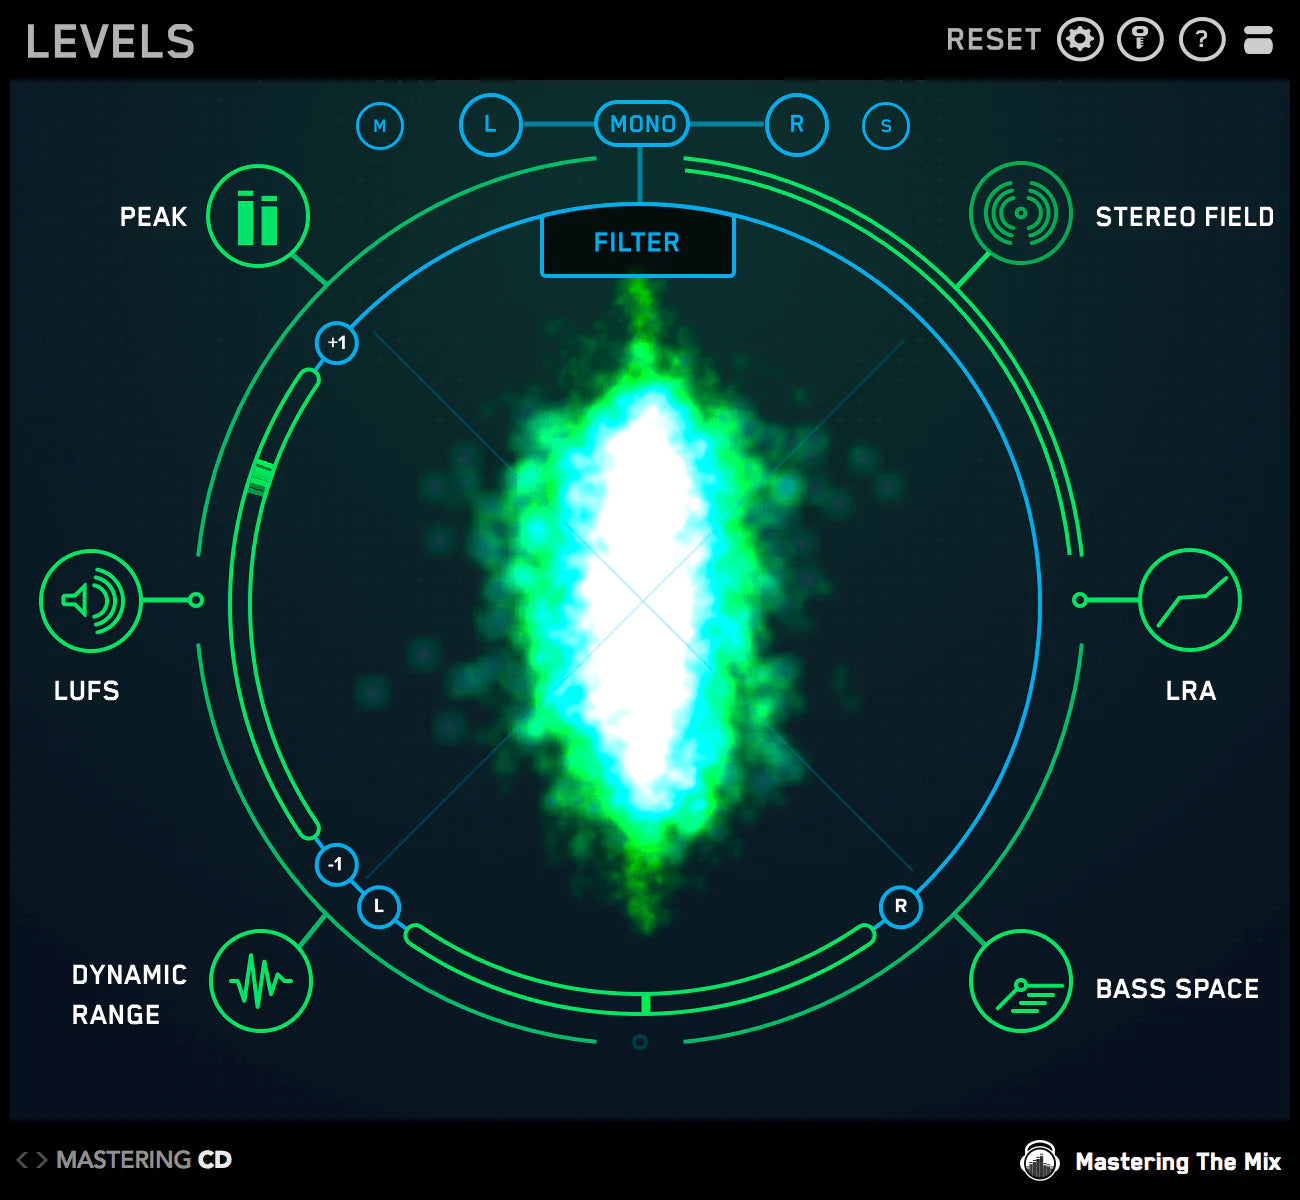 Stereo field LEVELS